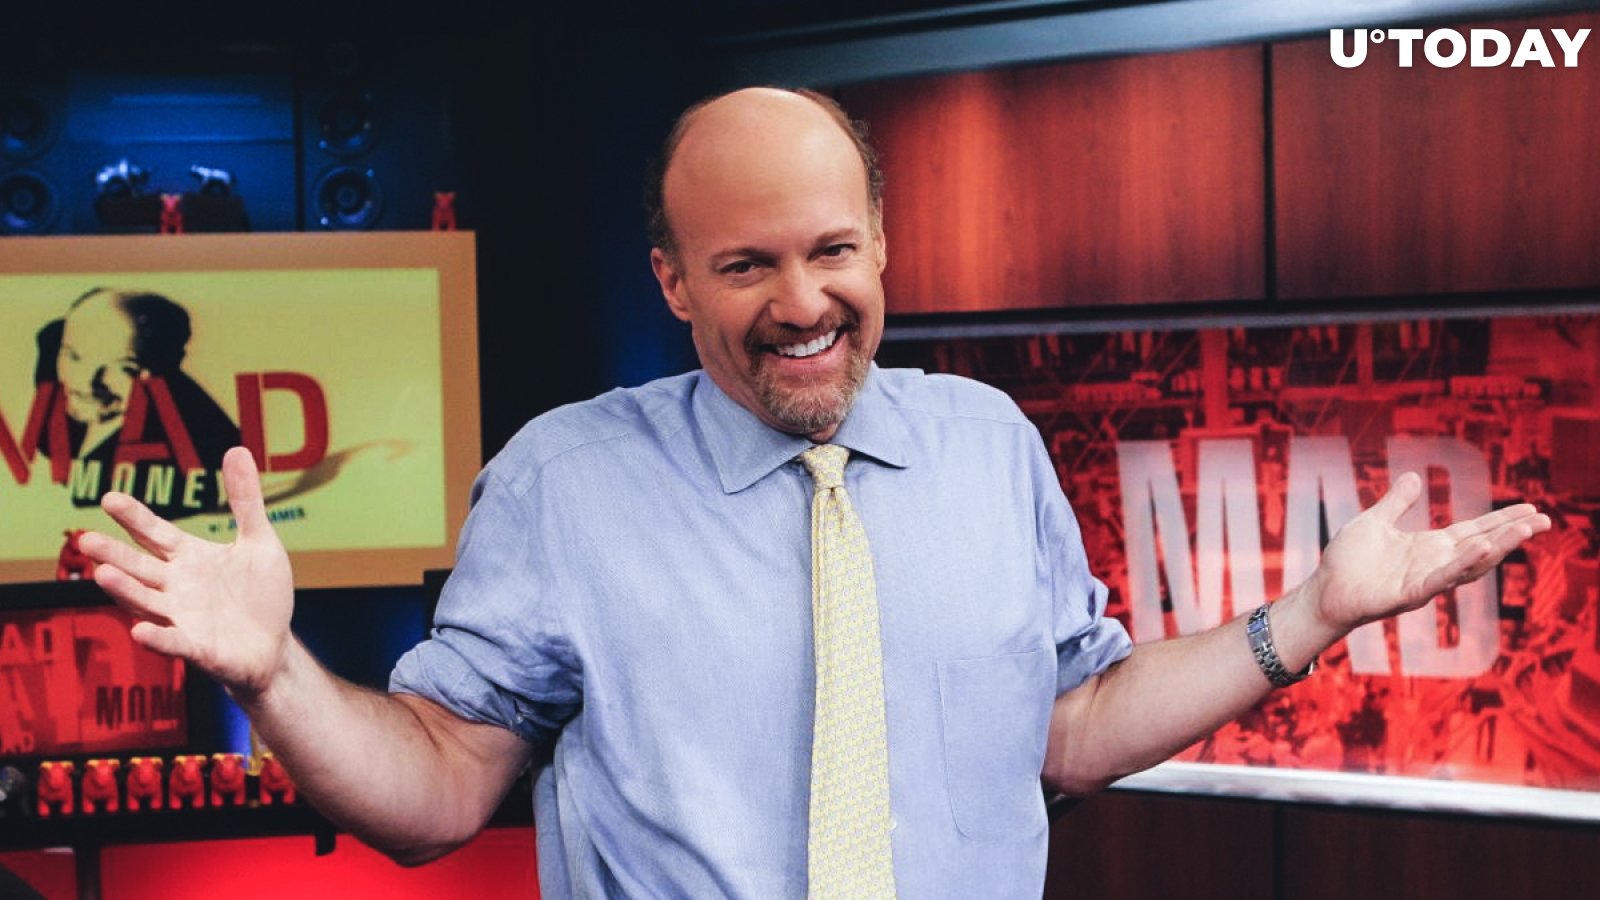 CNBC Host Jim Cramer Predicts $3 Trillion Crypto Market, Says He Wants to Get Paid in Bitcoin